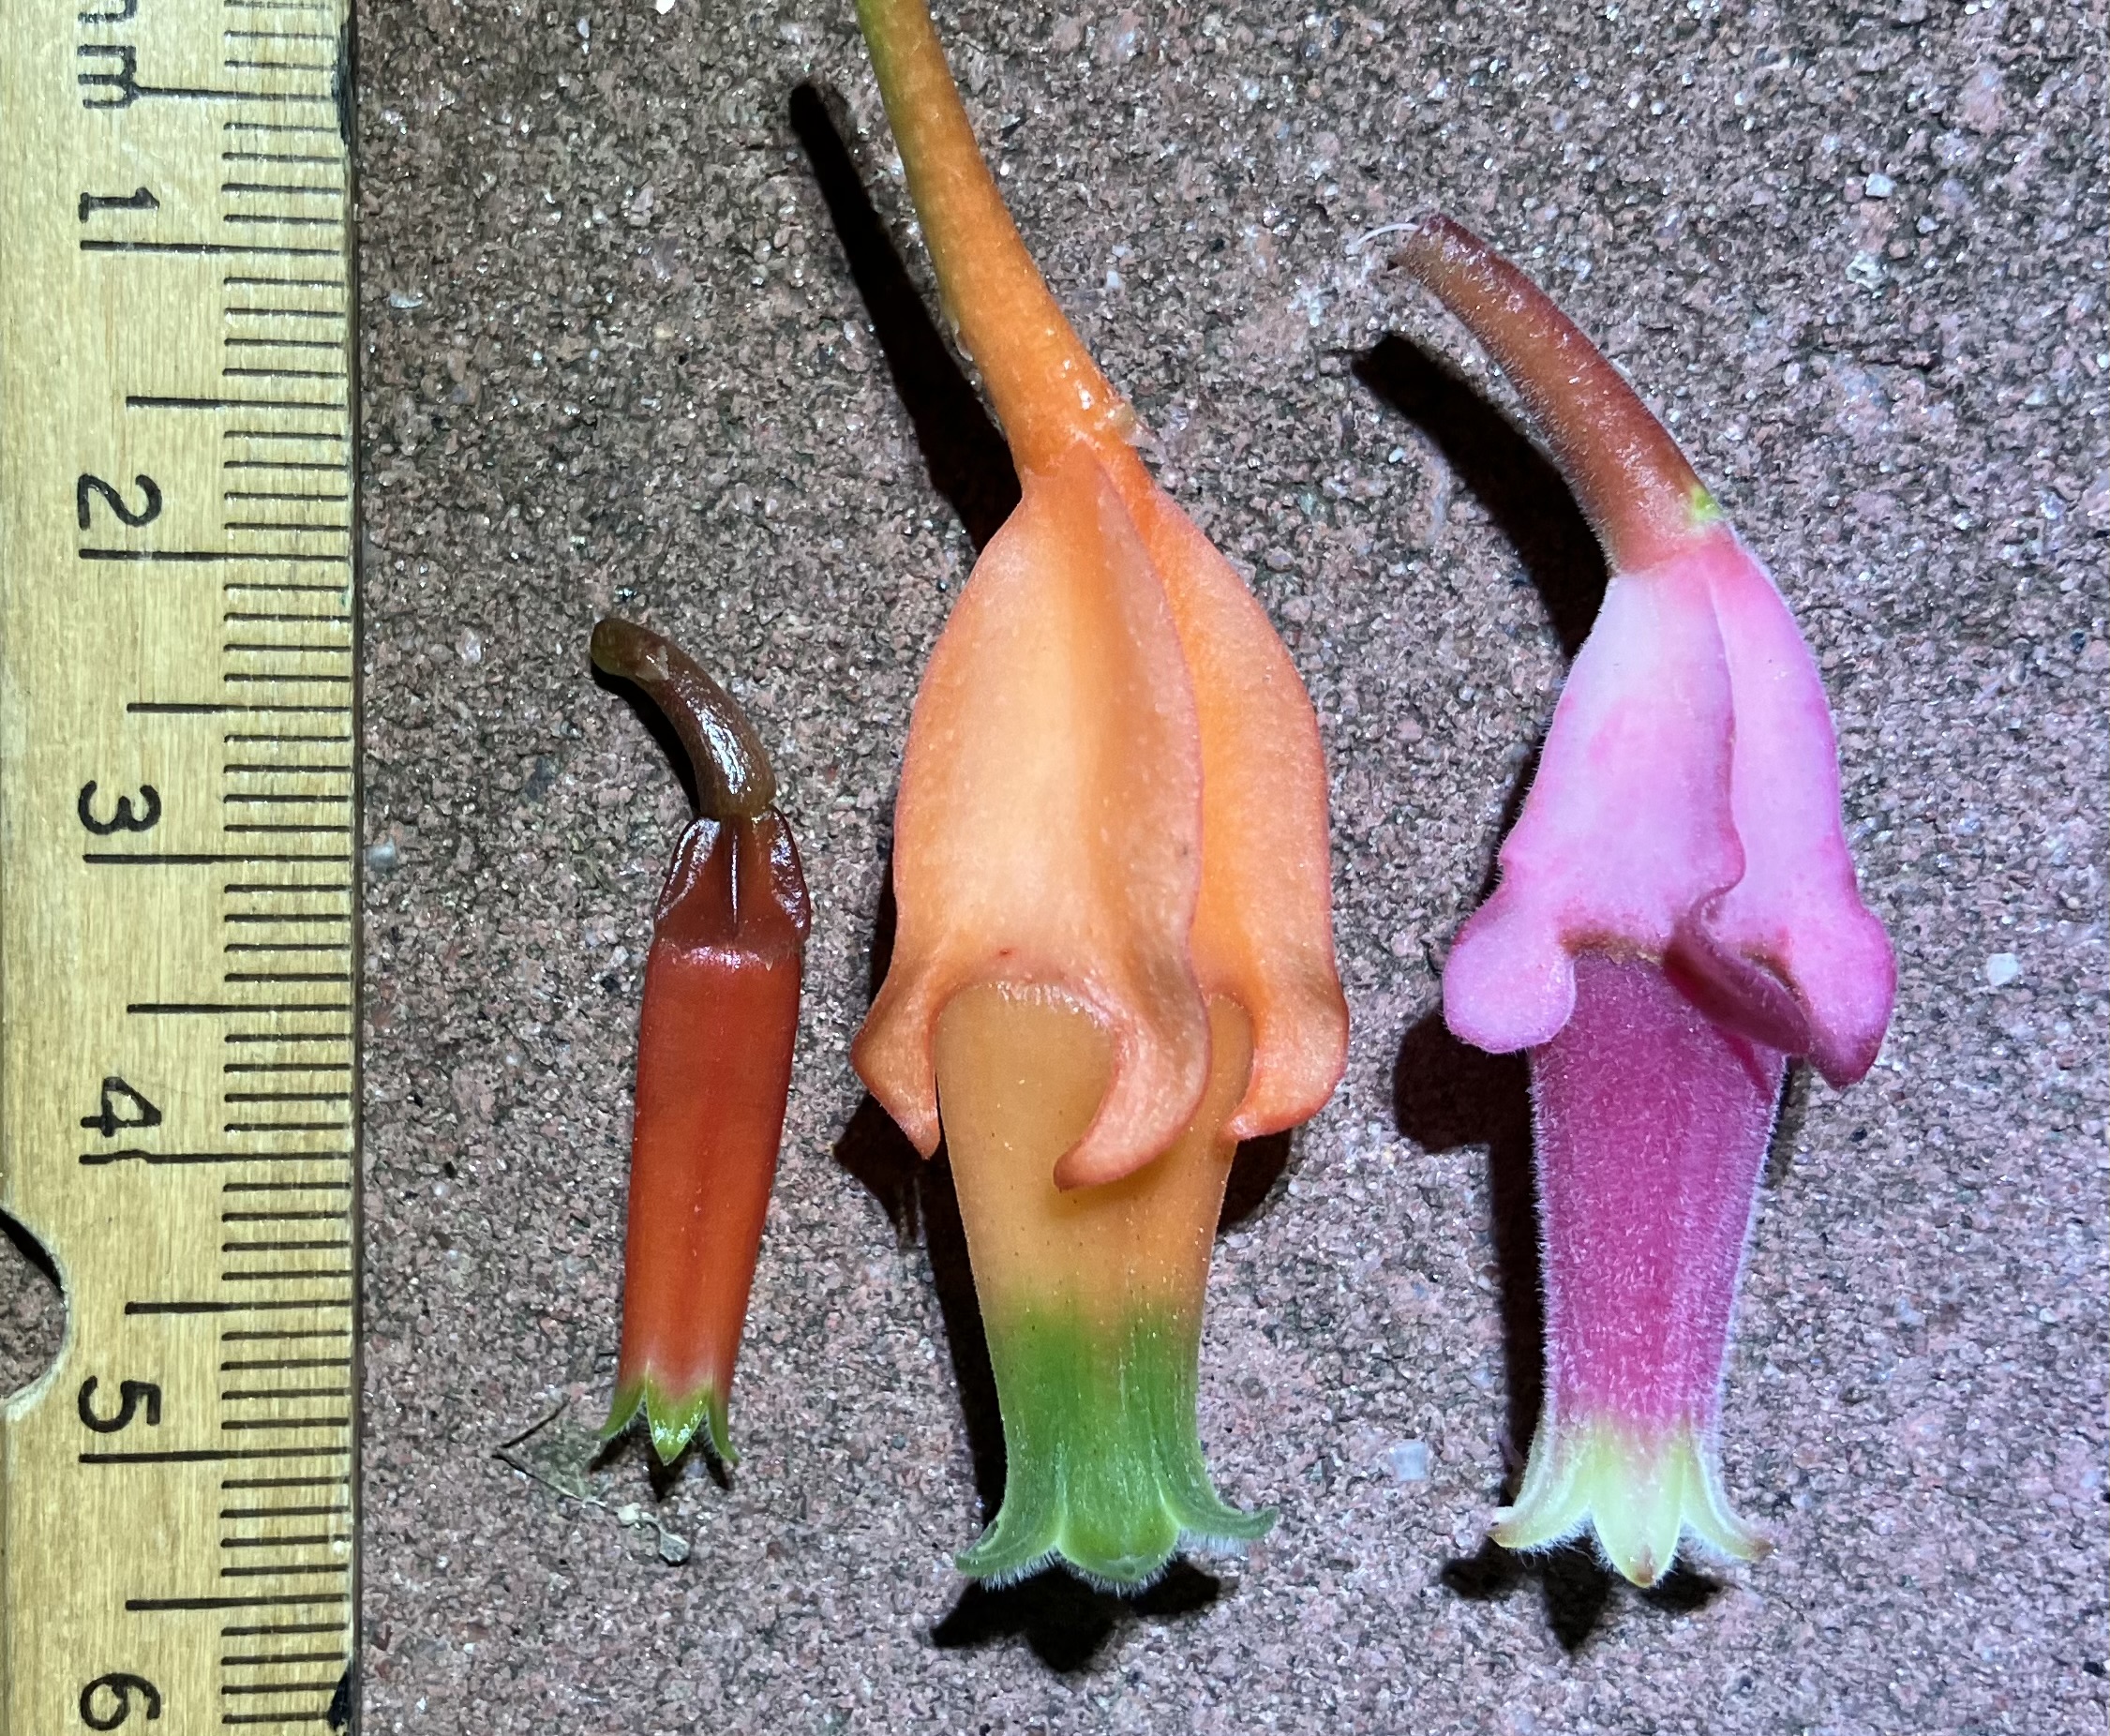 comparison of macleania flowers